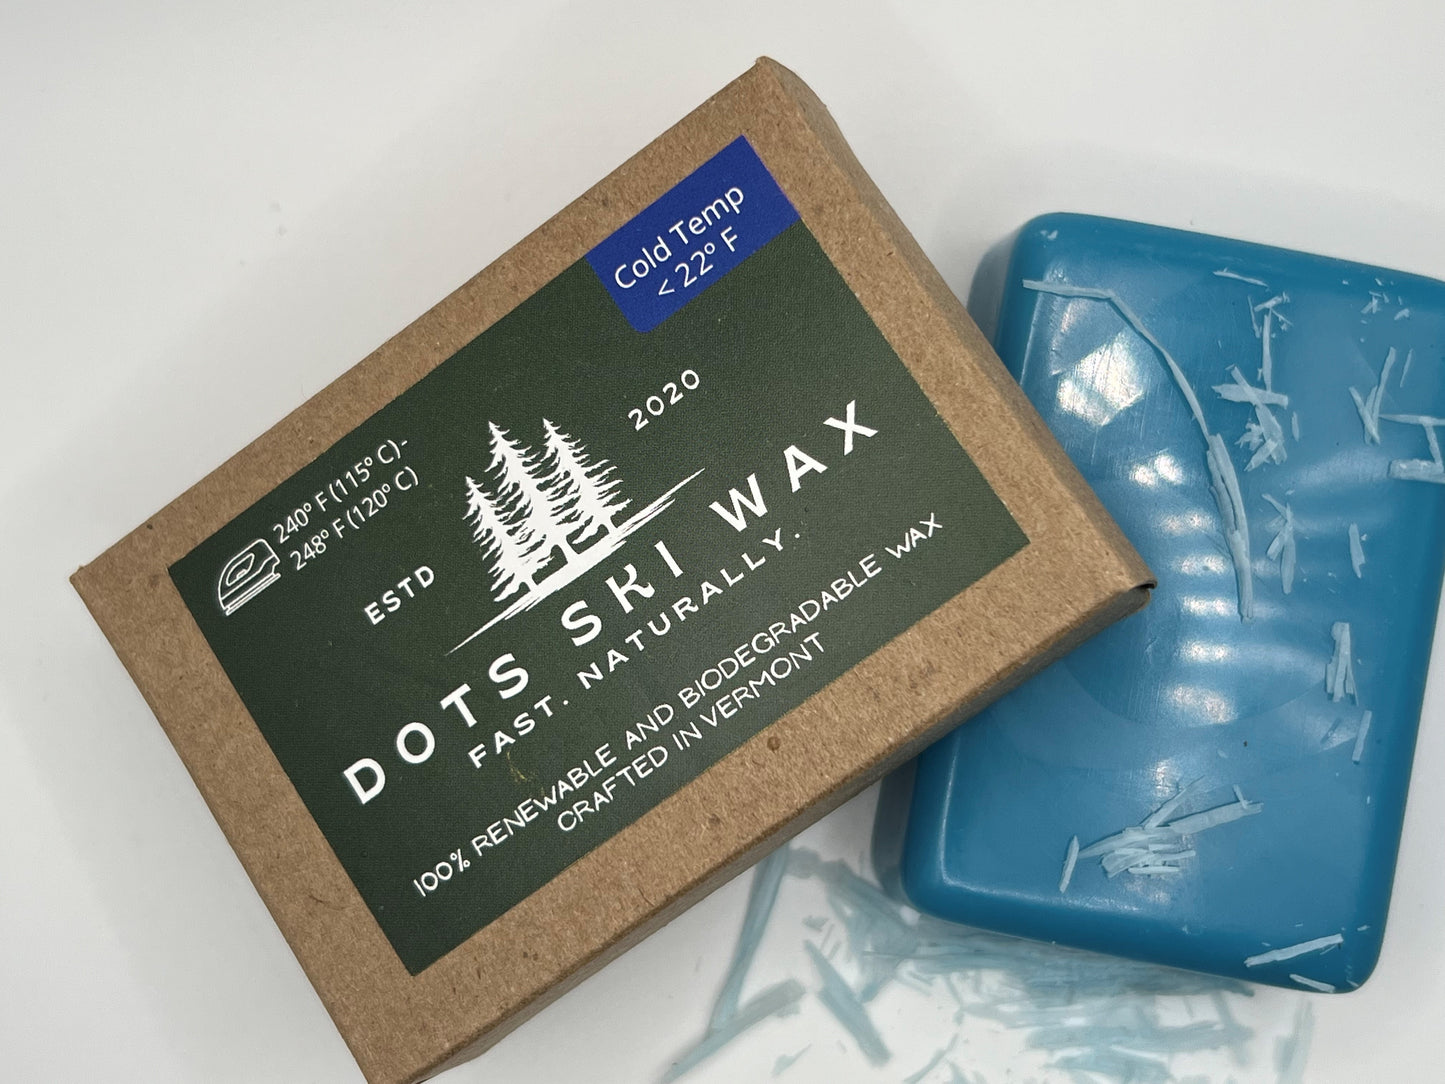 Blue Ski and Ride Wax is for Frigid Conditions